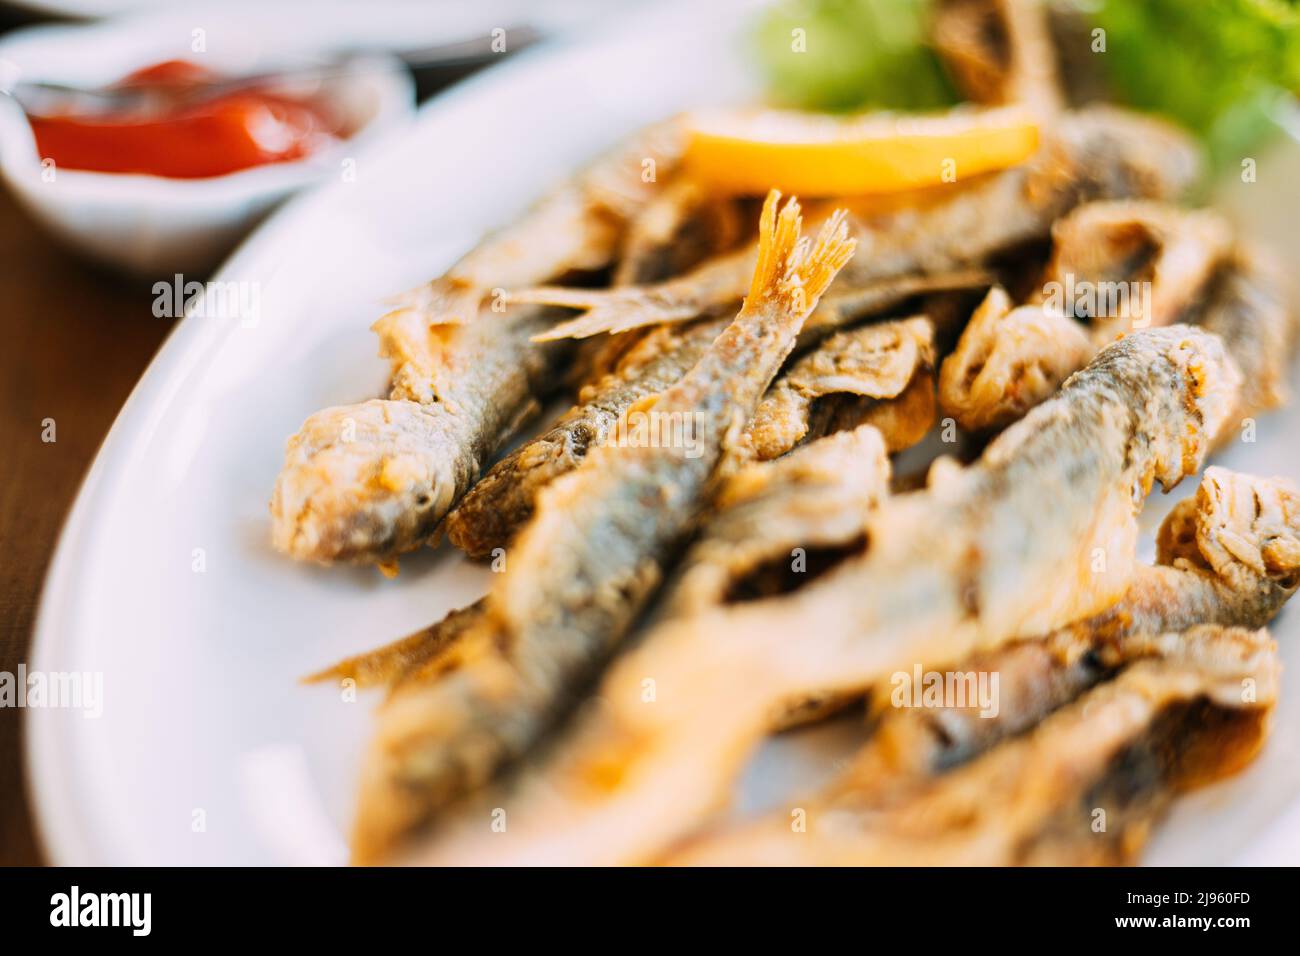 Dish with Mullet Fish With orange. Fried fry small fishes Stock Photo